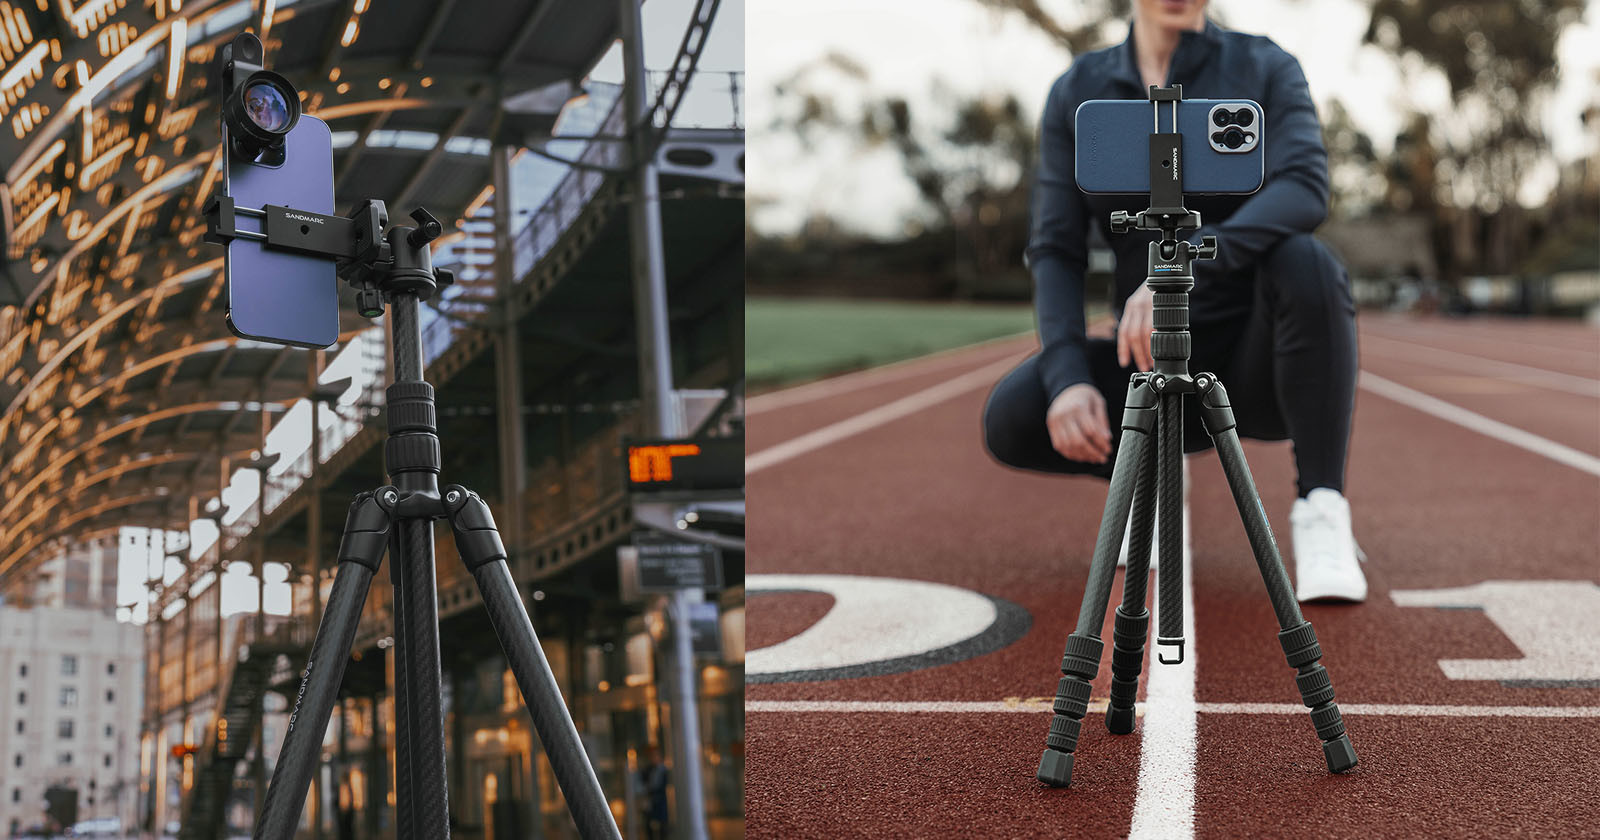 Sandmarcs New Carbon Fiber Tripod is Made Specifically for iPhone Shooters